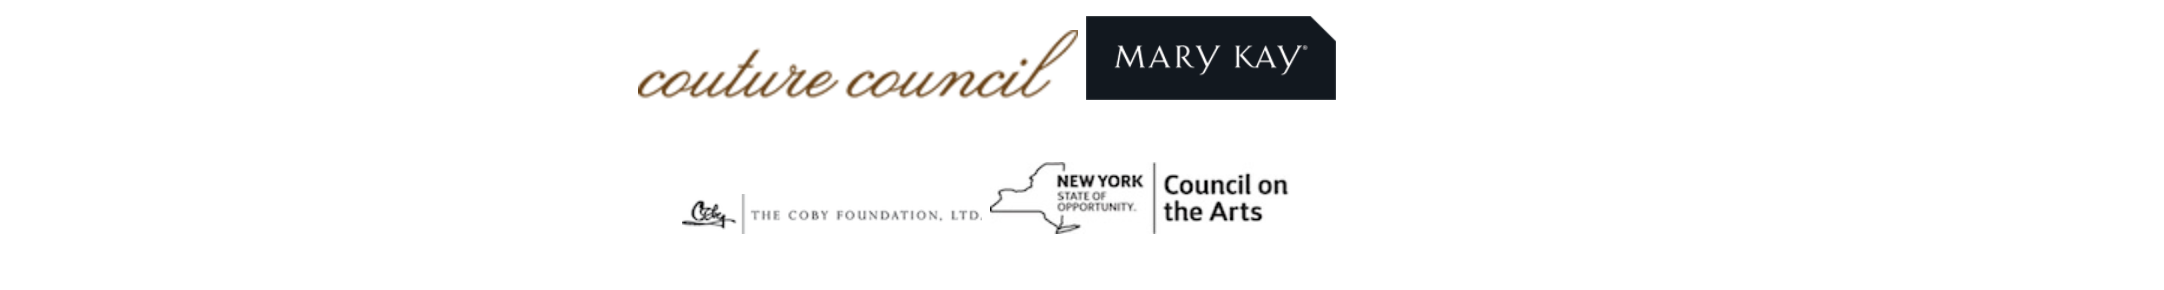 couture council and mary kay logo